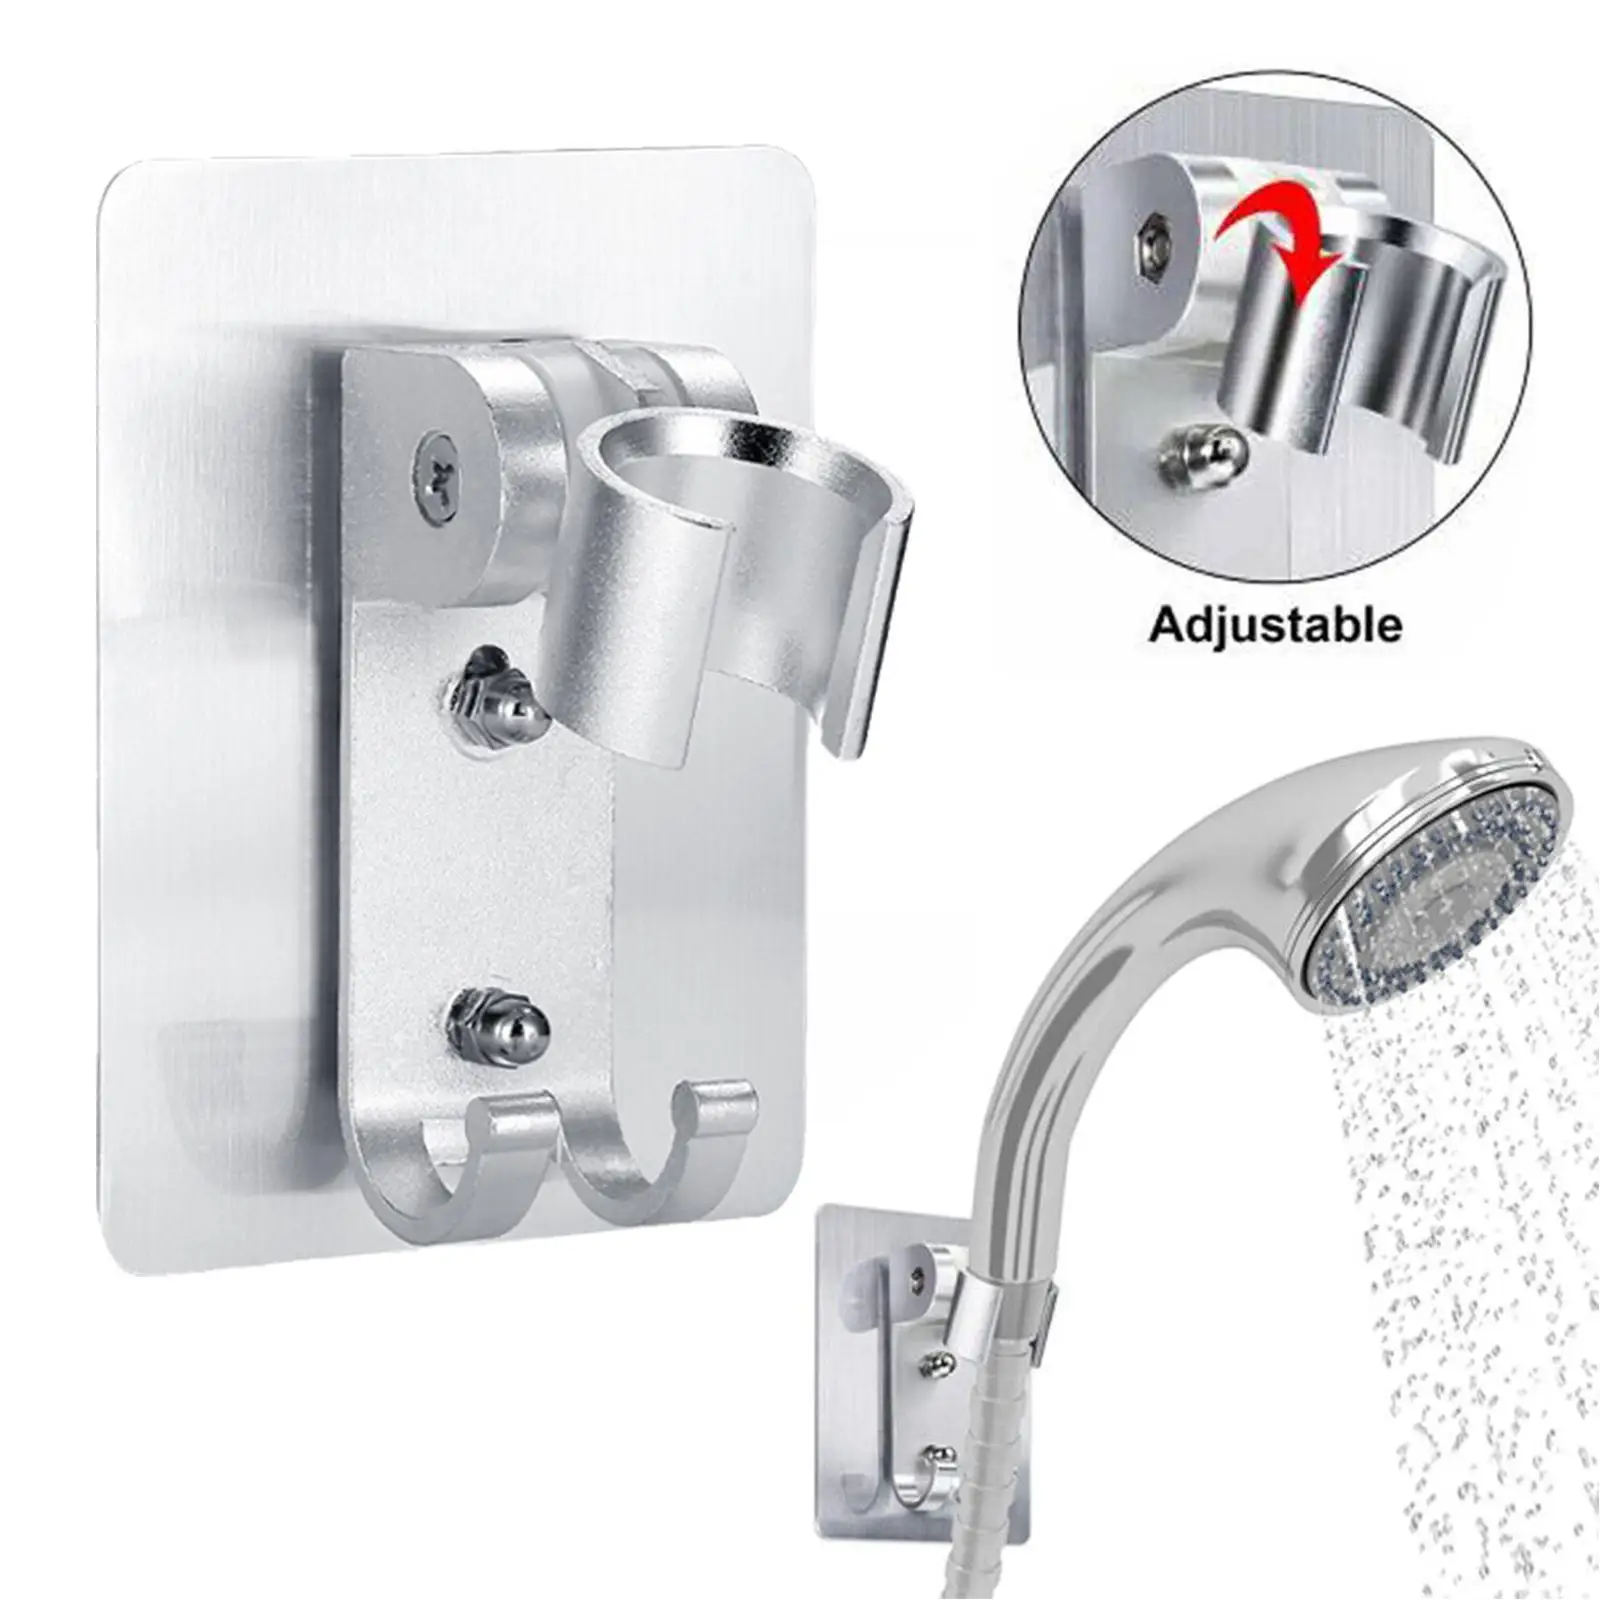 

90° Strong Adhesive Aluminum Wall Gel Mounted Shower Head Holder Adjustable Portable Bathroom Accessories Stand Bracket